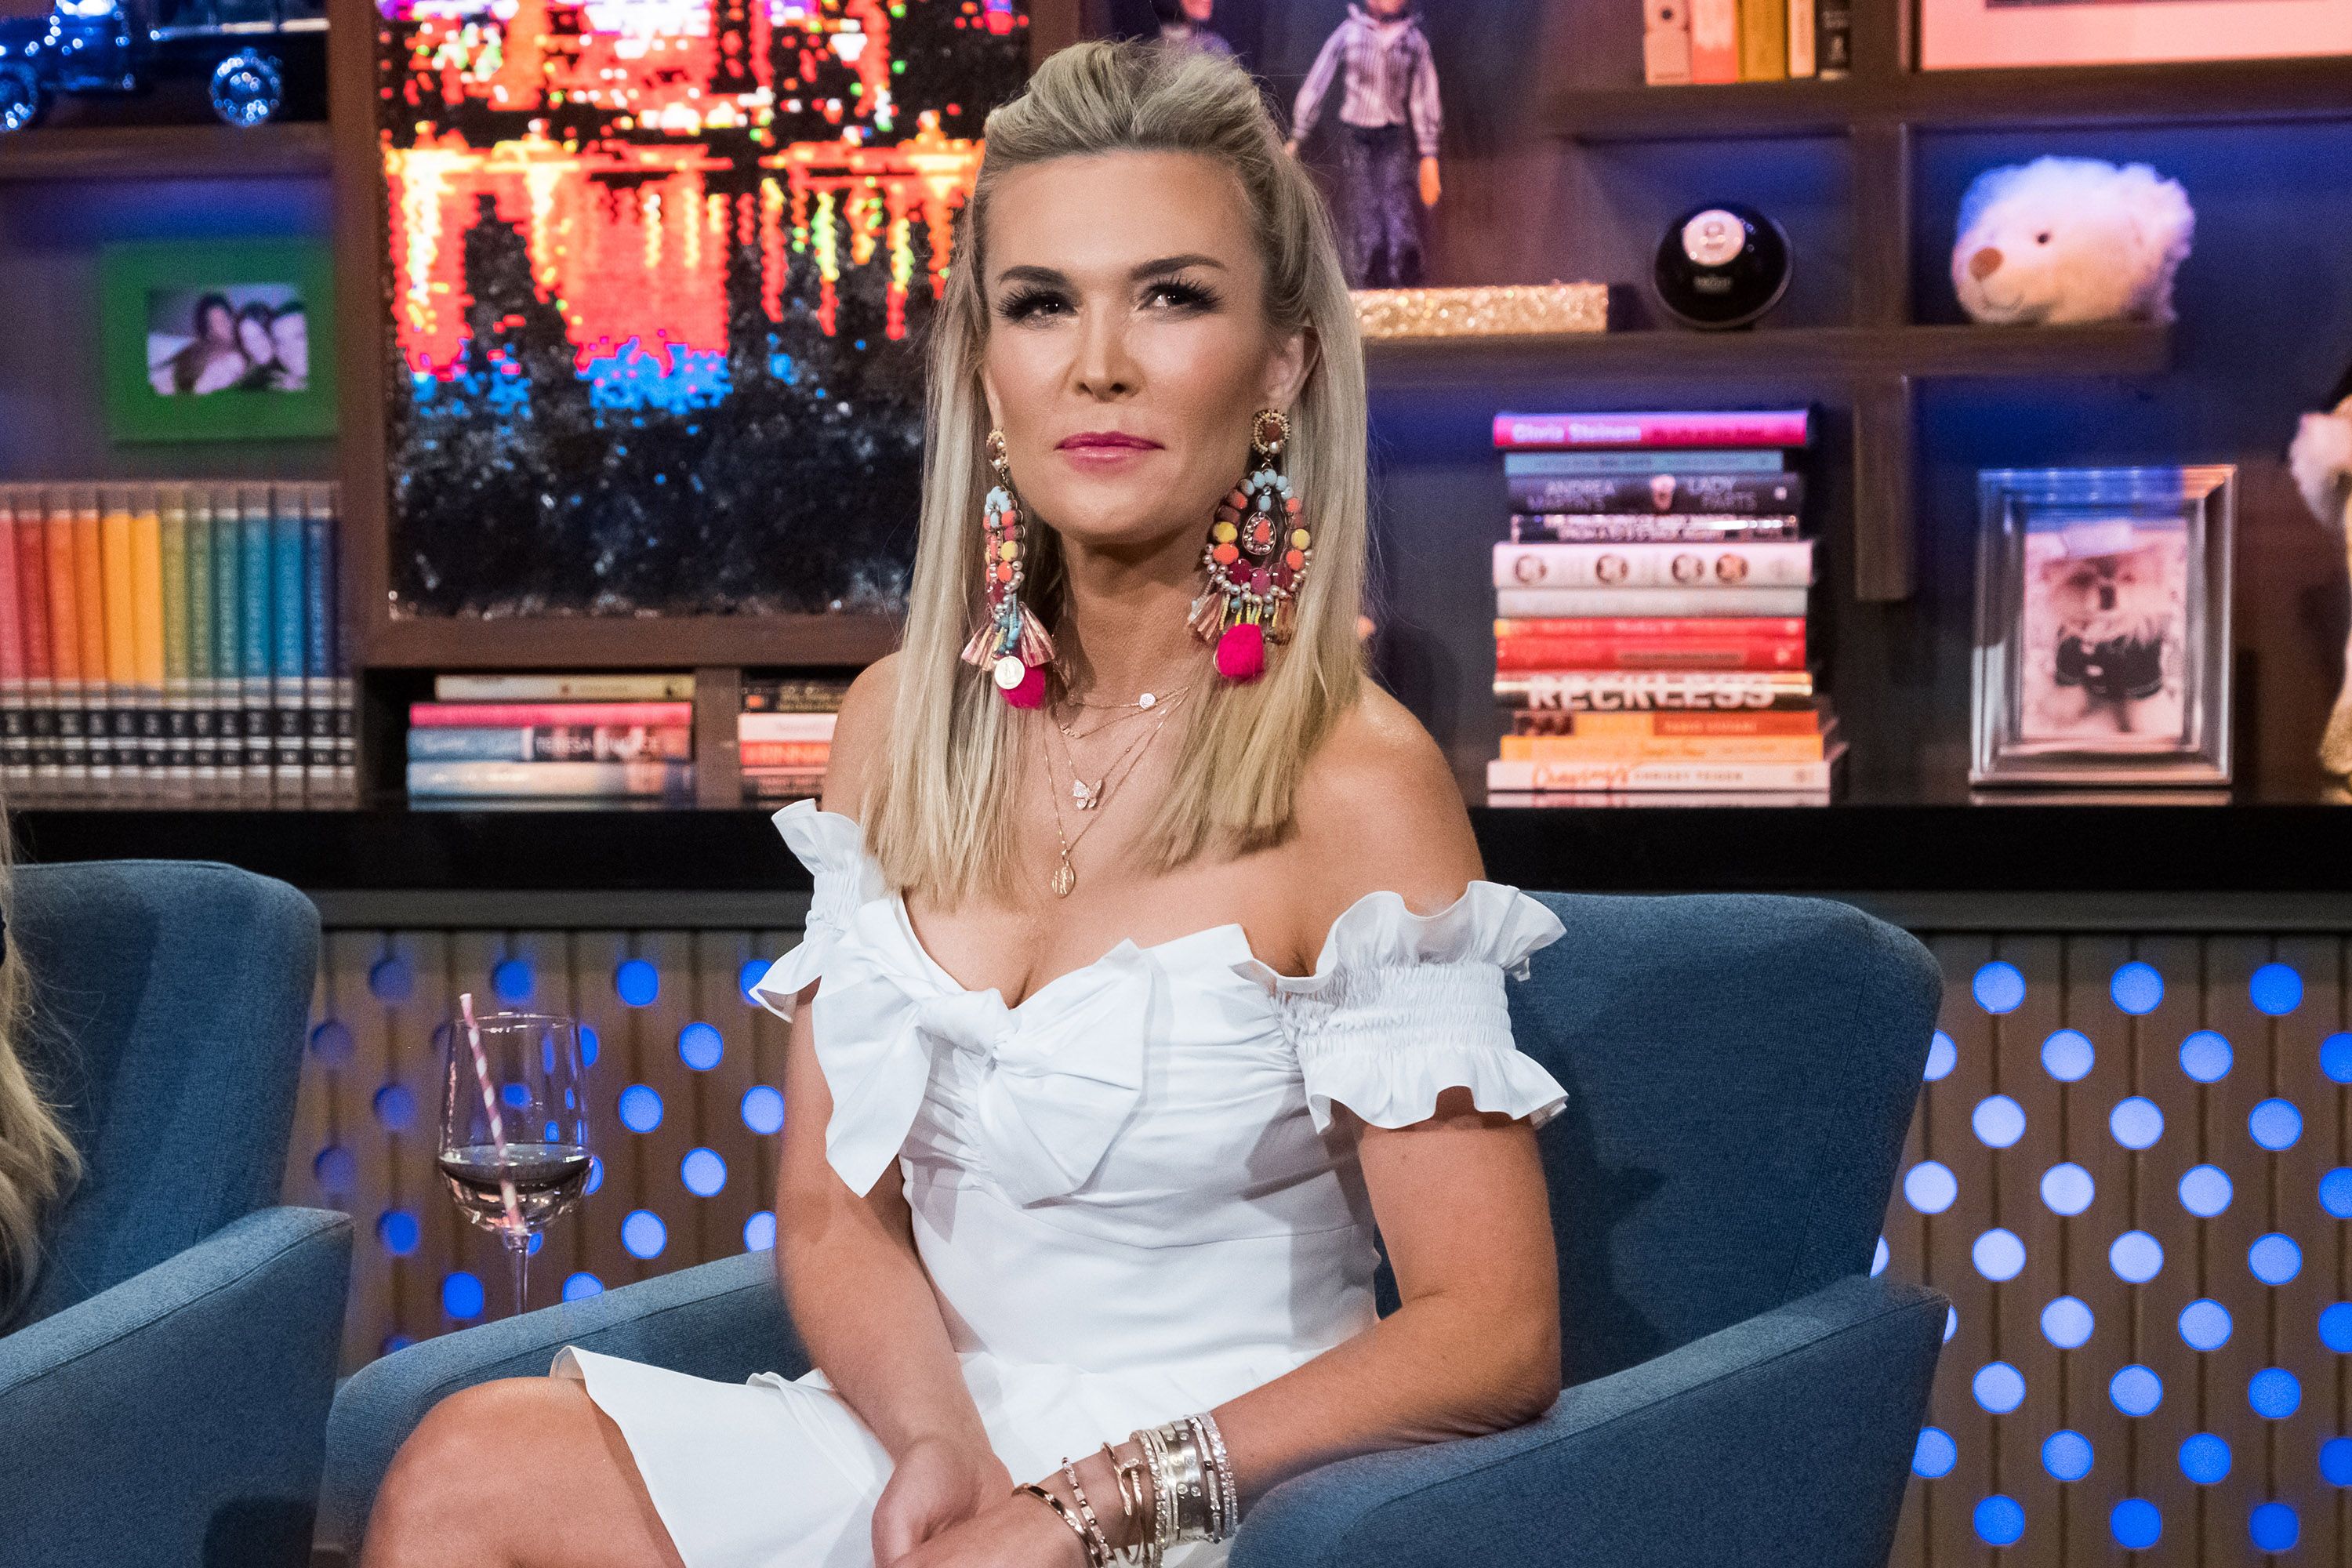 Has Tinsley Mortimer Done Plastic Surgery?